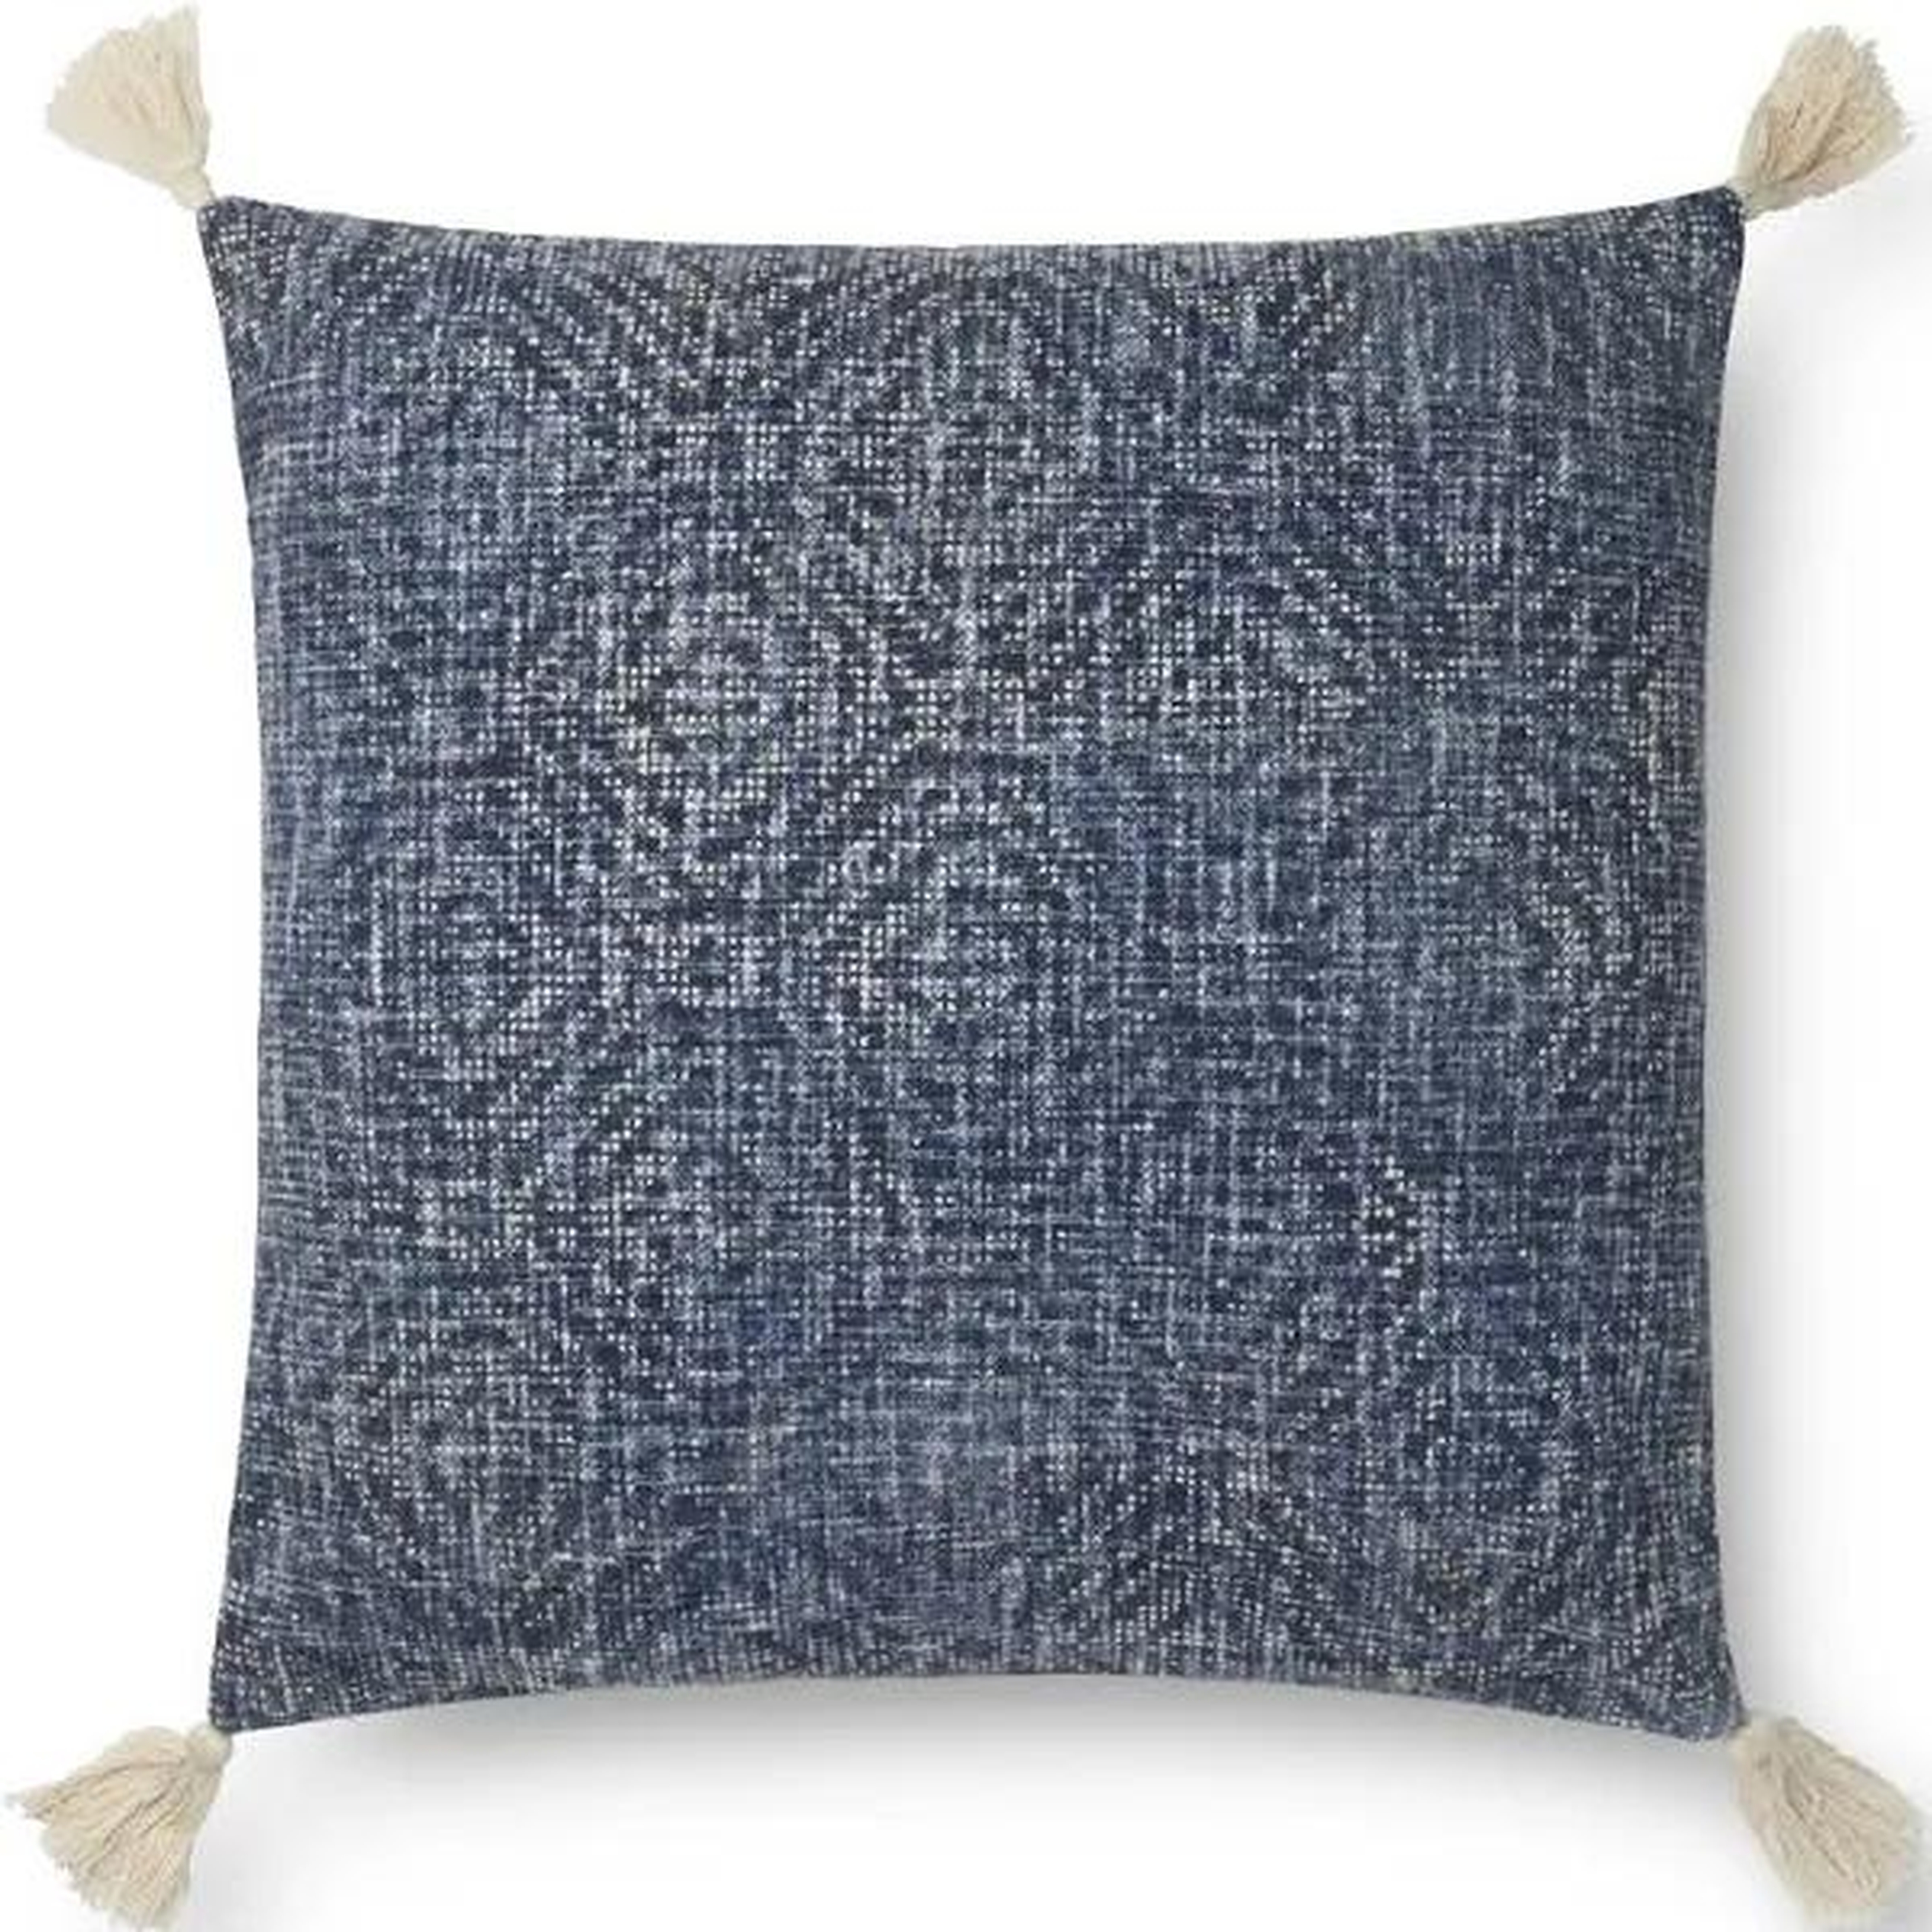 Distressed Pattern Throw Pillow Cover with Tassels, 22" x 22", Blue - Loloi Rugs